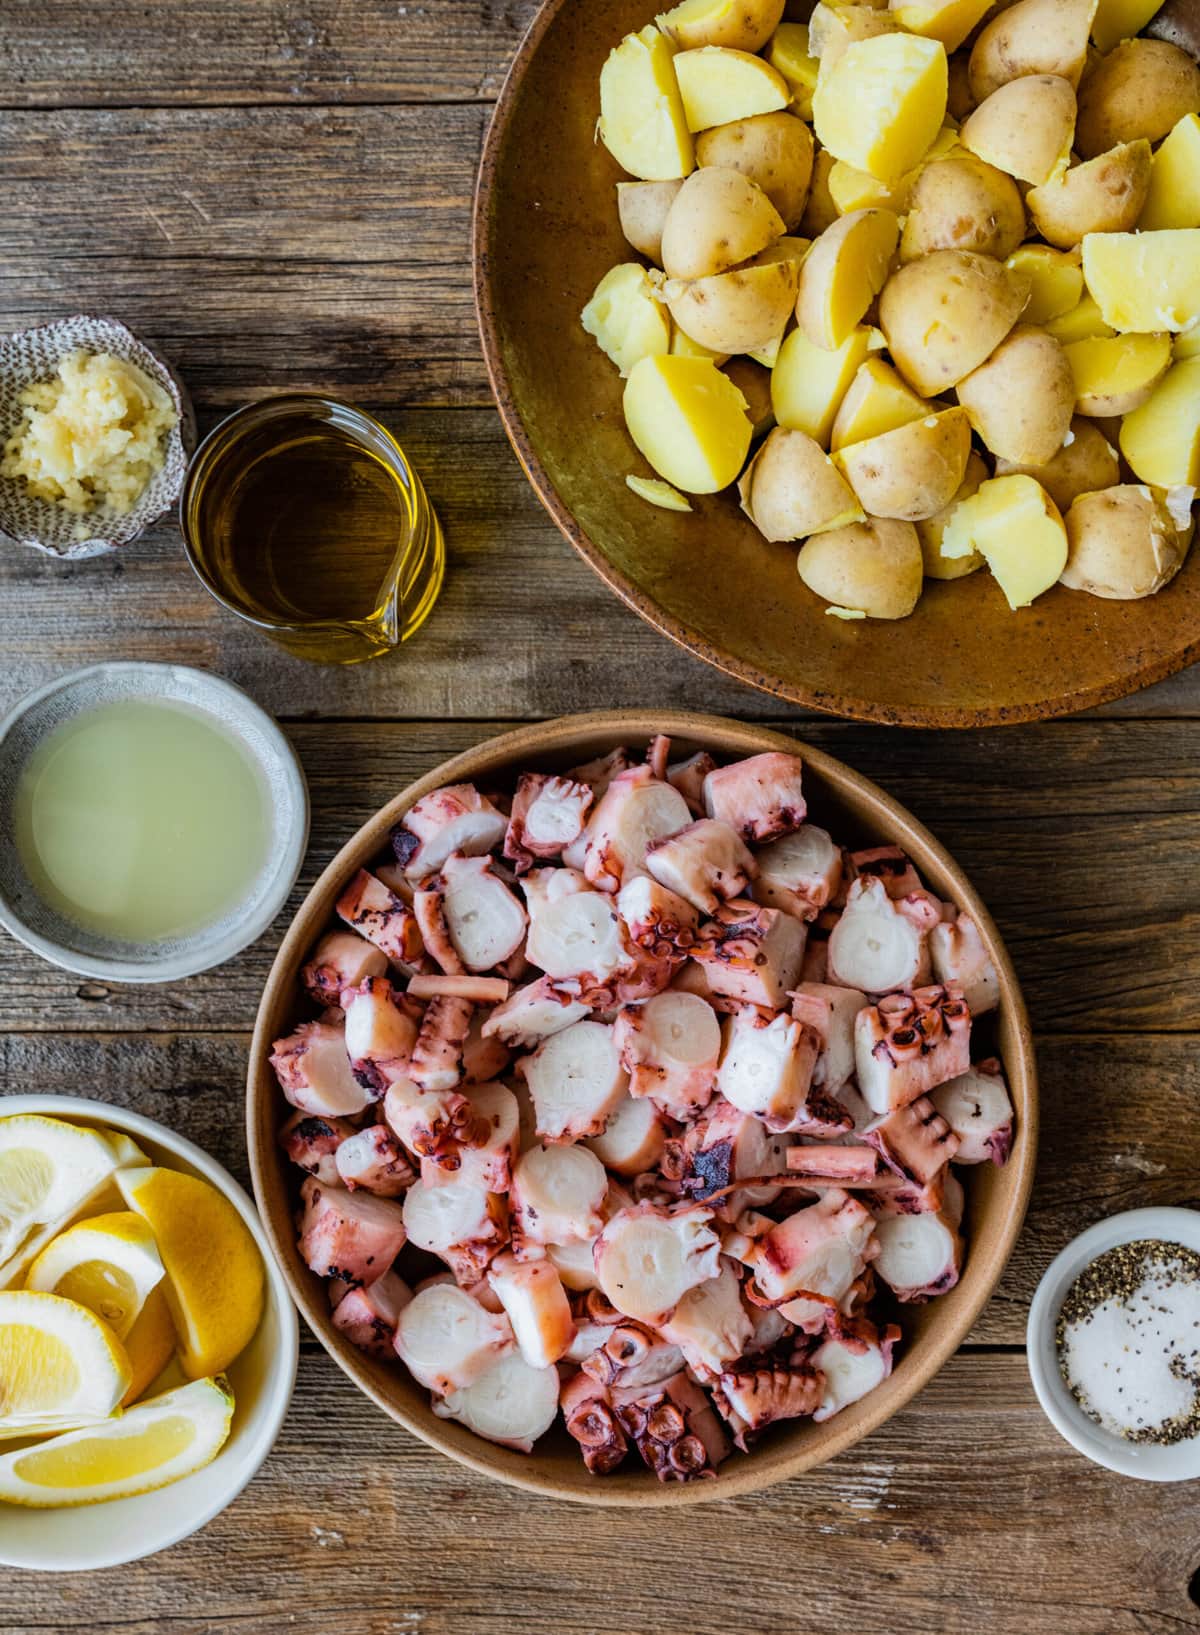 How to Make-Italian Octopus Salad Recipe with potatoes- salad ingredients.